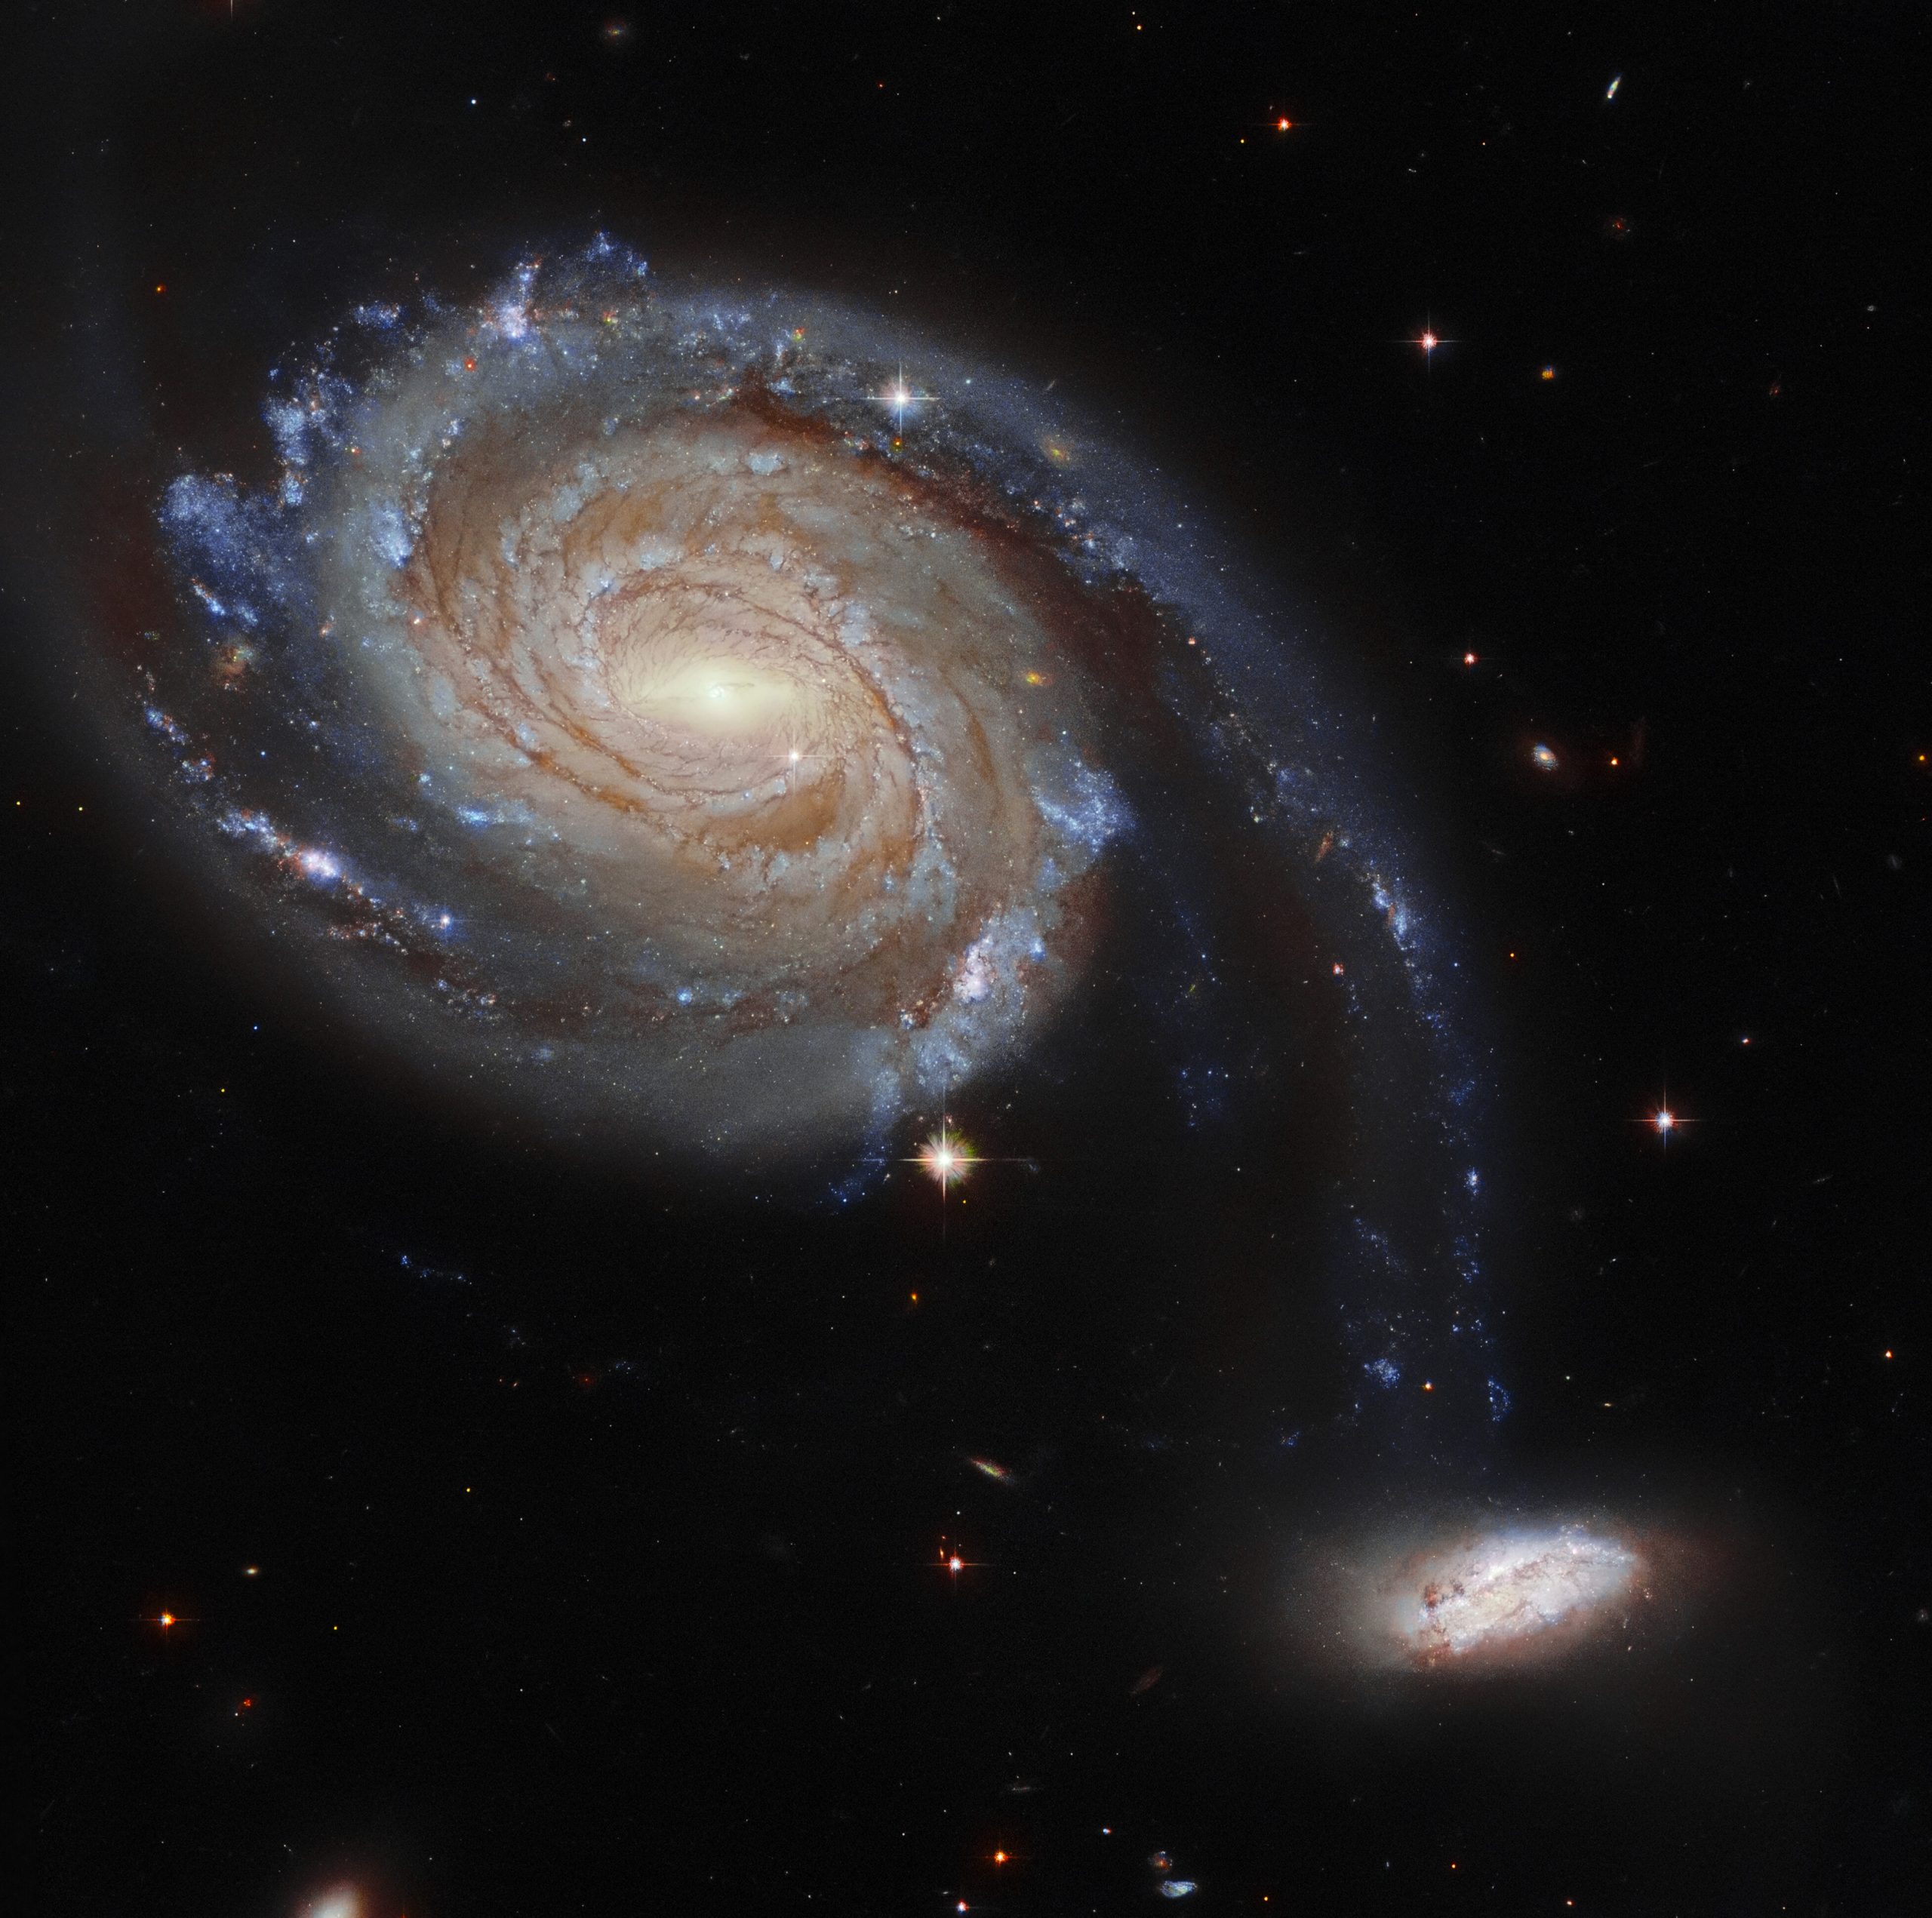 March includes an image of a pair of interacting galaxies called Apr 86, located 220 million light-years away. Credit: ESA/Hubble and NASA, Dark Energy Survey, J. Dalcanton